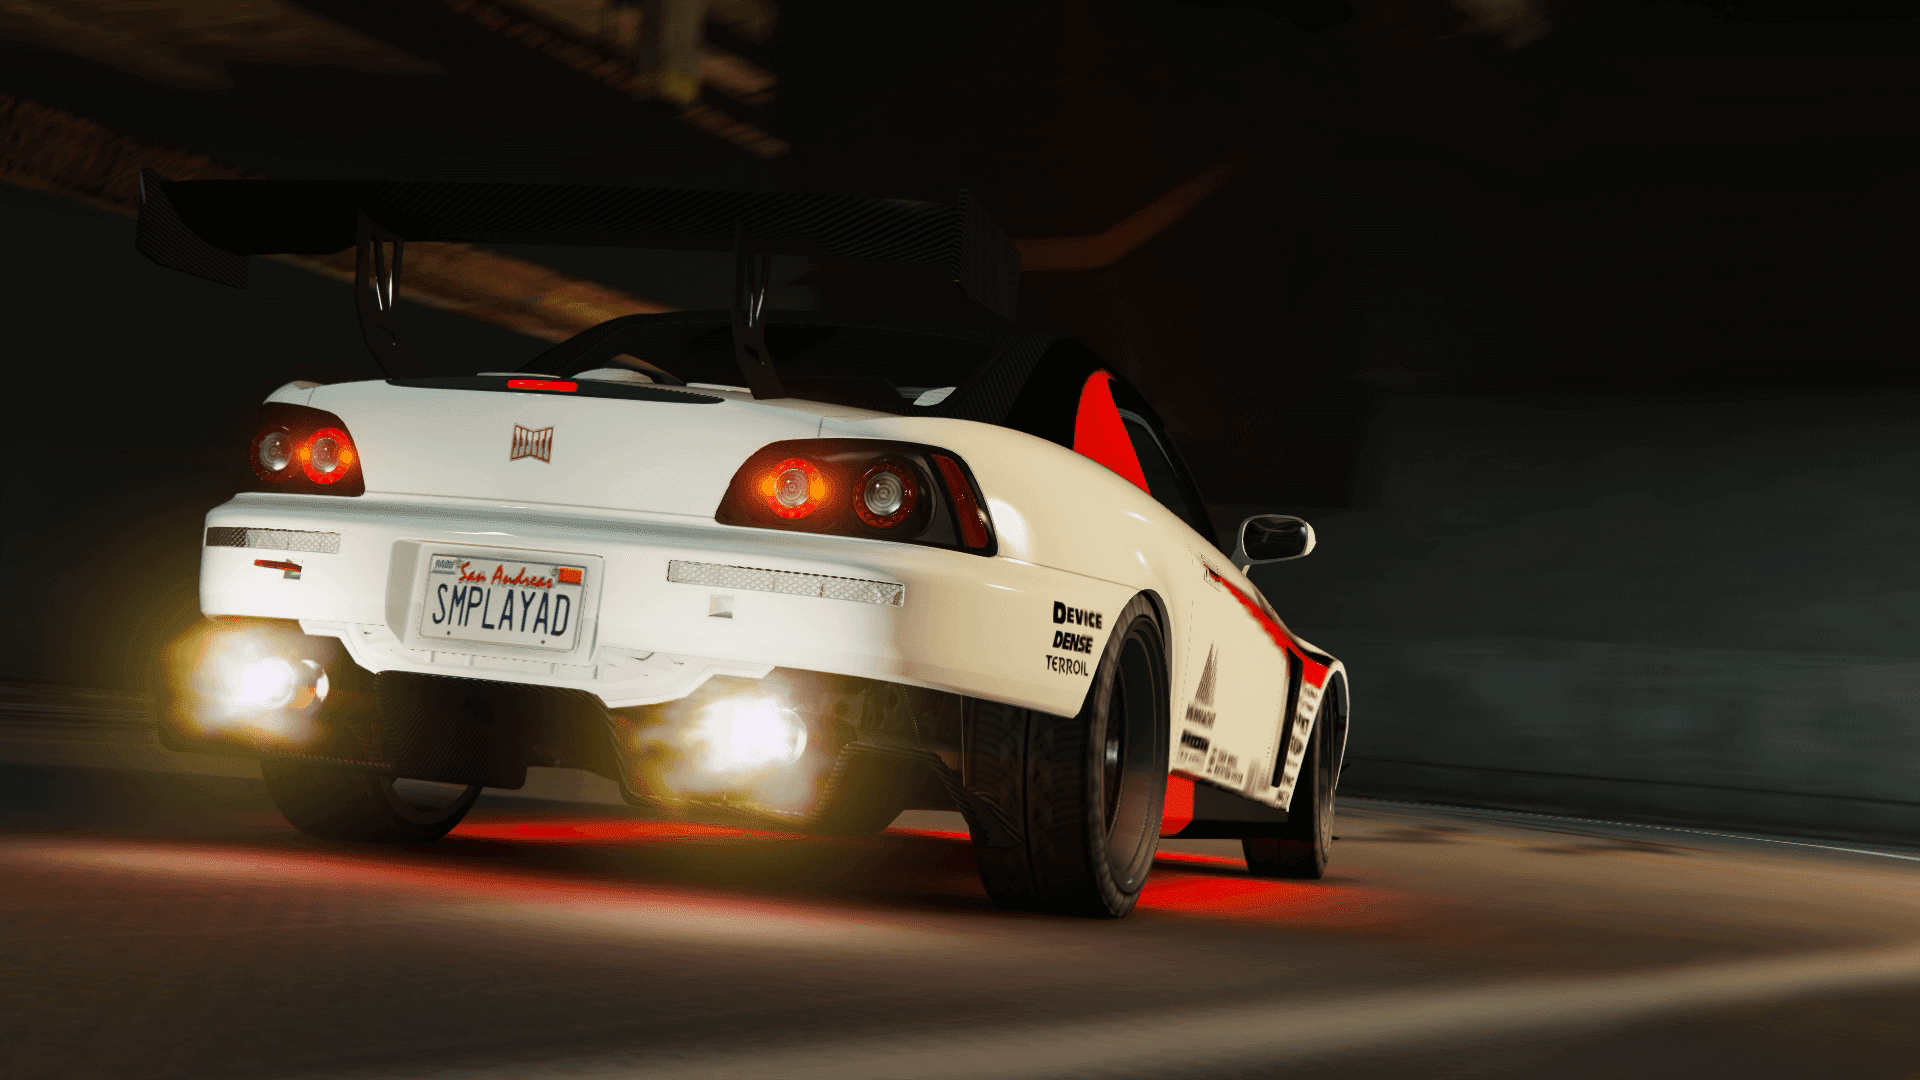 (HD) This Dinka RT3000 plays the role of a street racing demon that haunts the test track 1